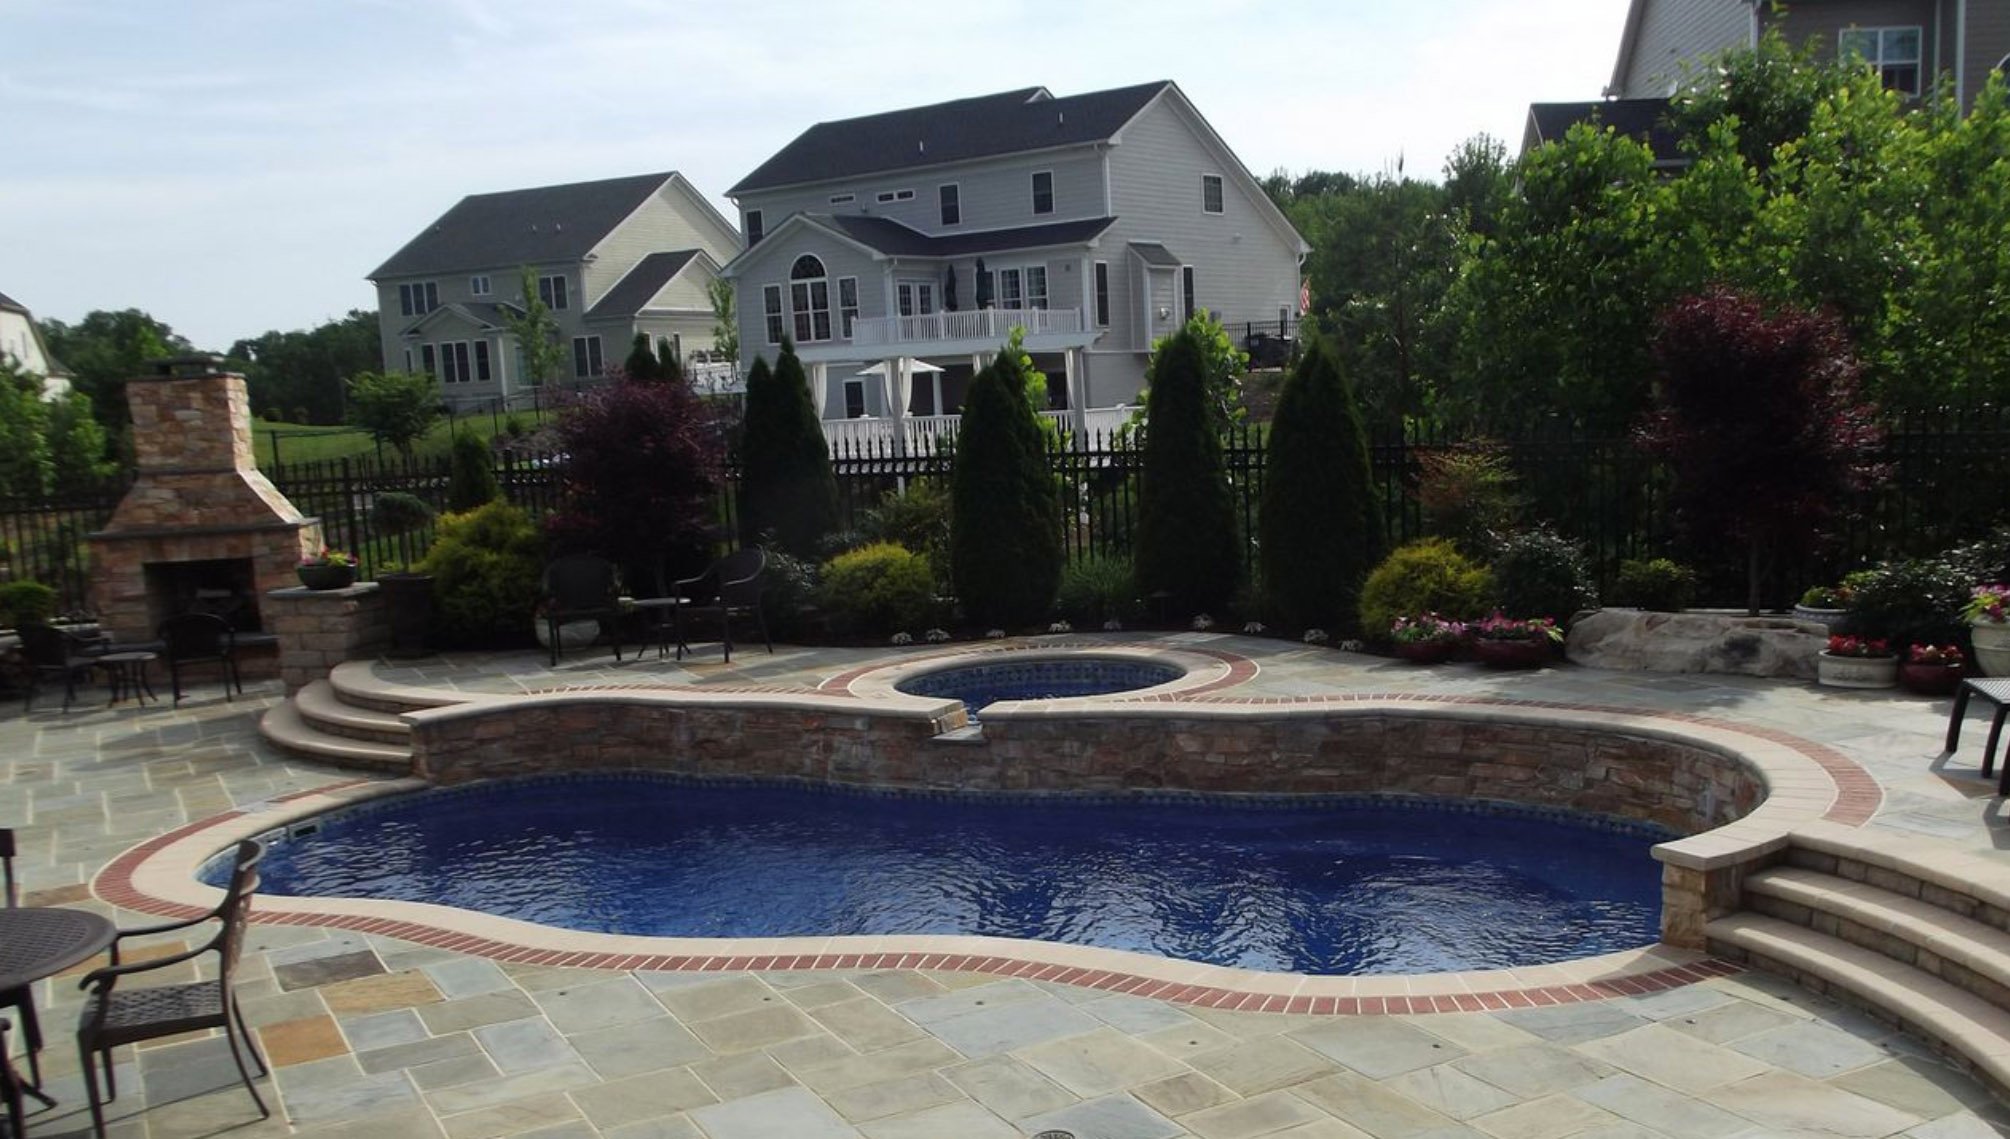 5 Ways to Make Your Pool Project More Affordable in 2021